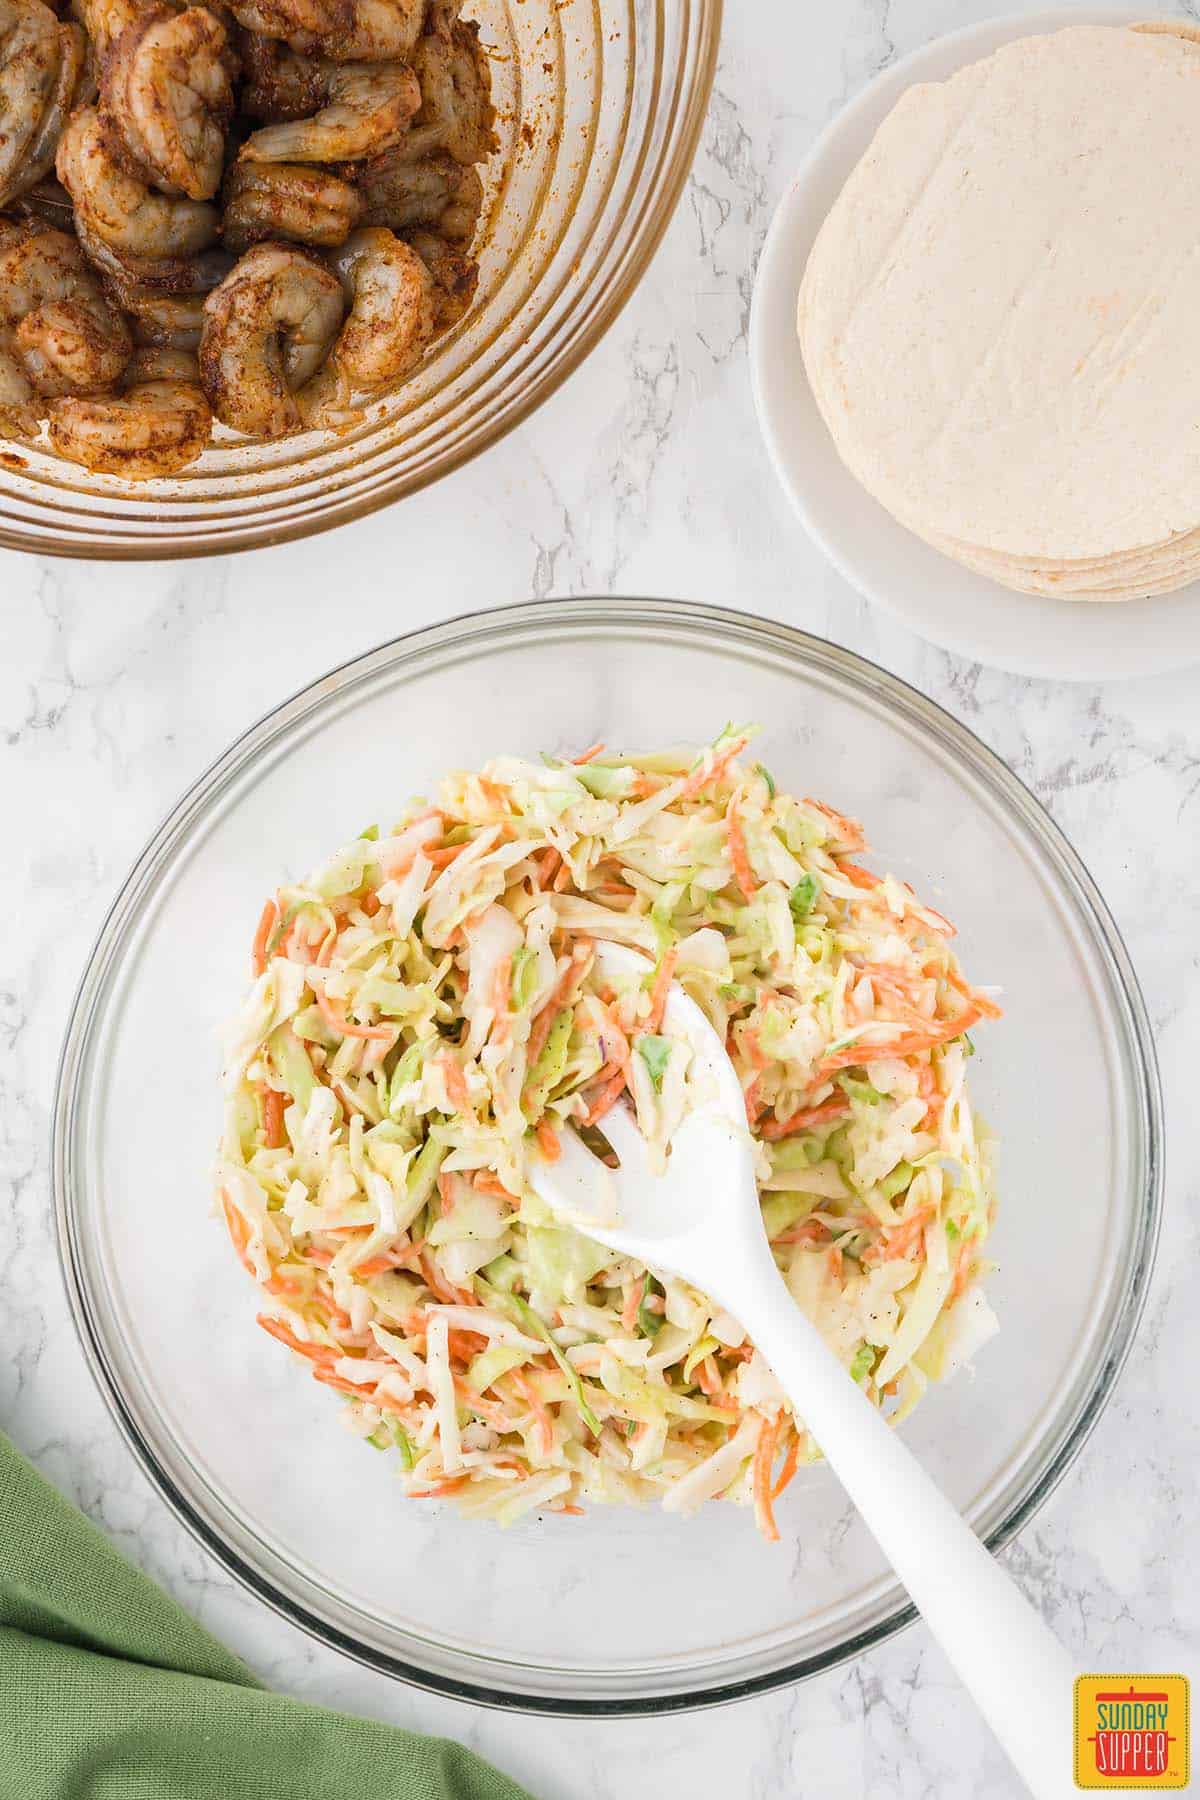 mixing coleslaw for shrimp tacos recipe in a bowl with a white slotted spoon